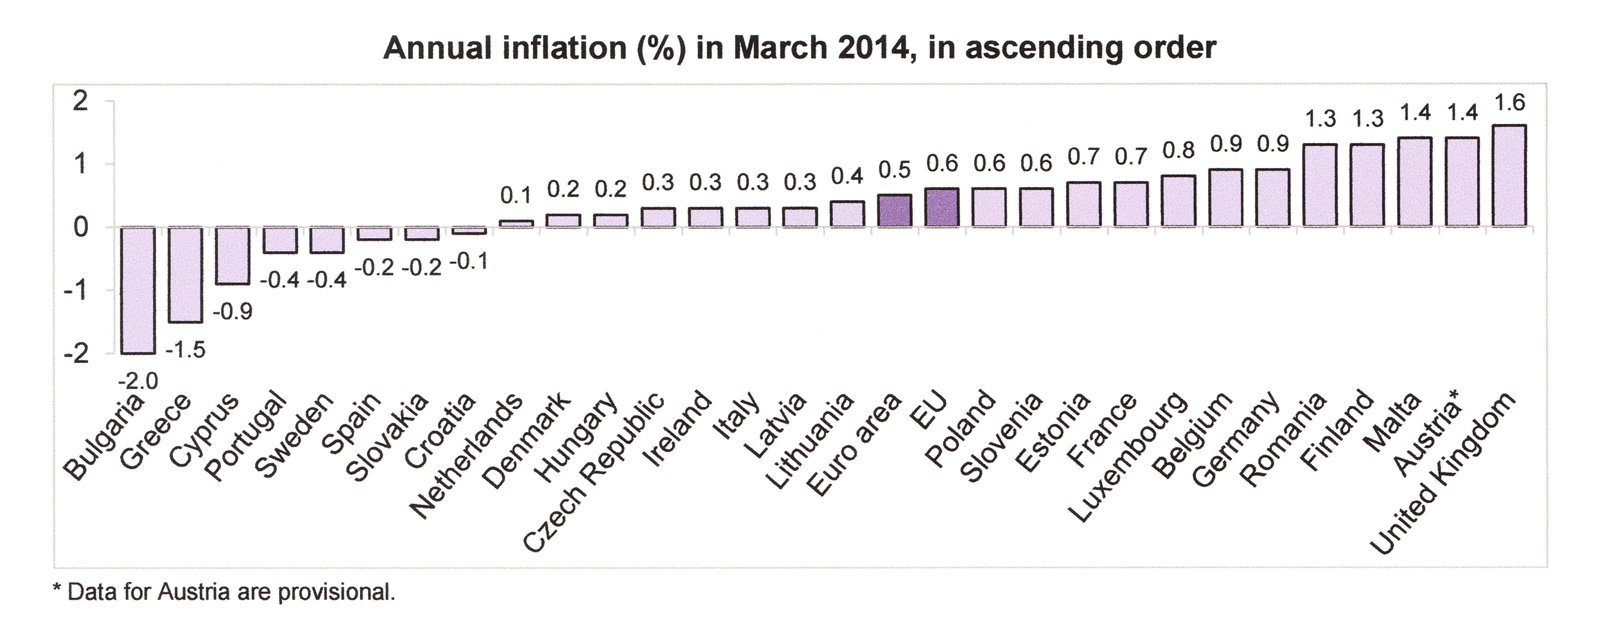 http://einarbb.blog.is/users/72/einarbb/img/inflation_march.jpg